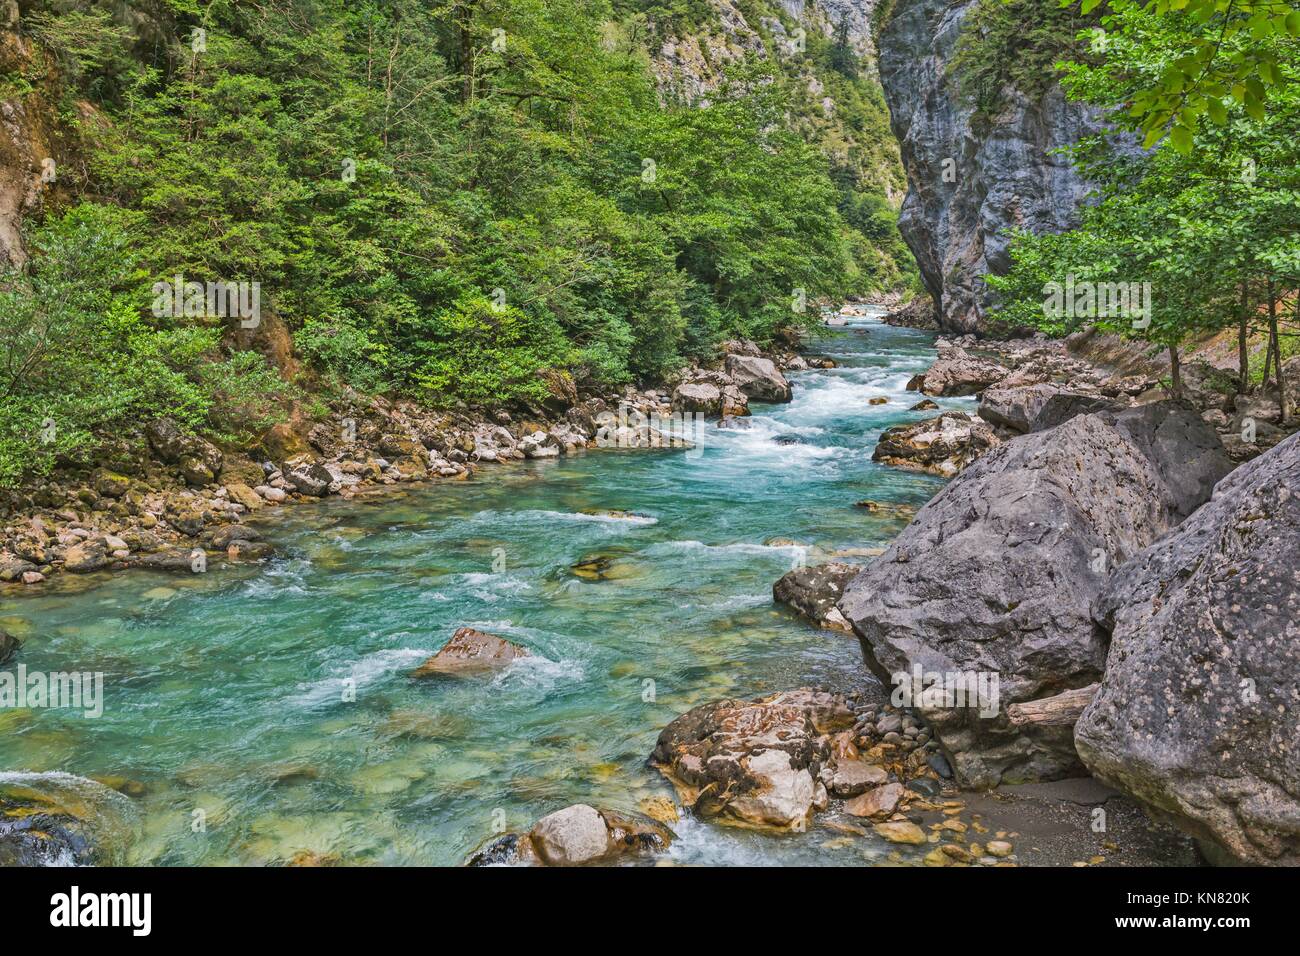 Mountain river flowing by the gorge with rocks and trees, Abkhazia, Caucasus mountains Stock Photo